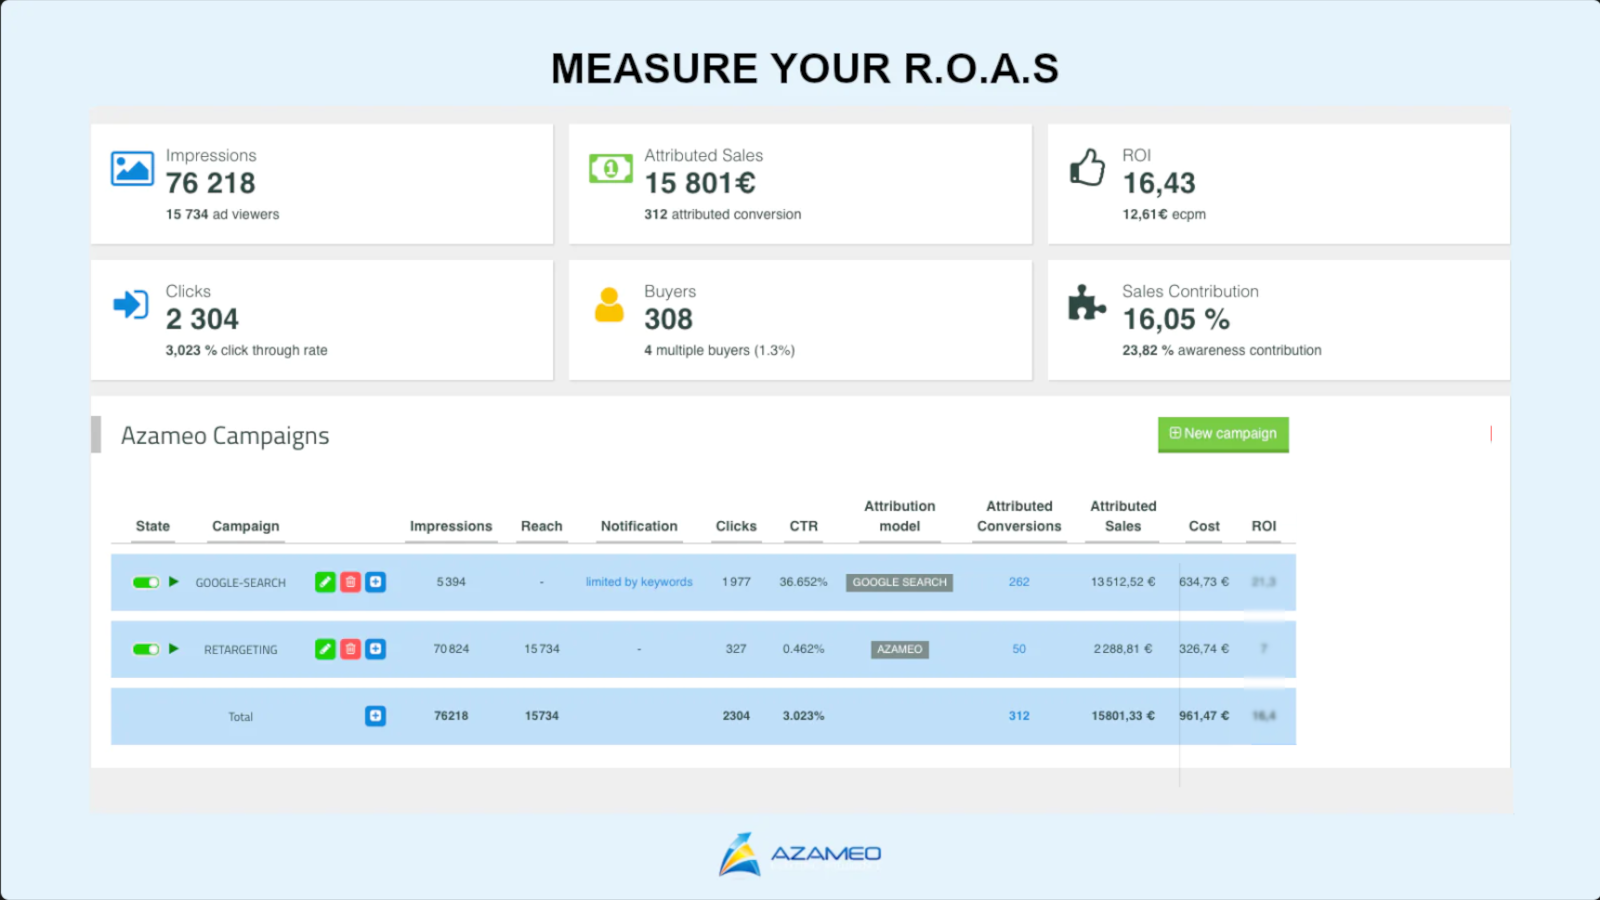 Simple and smart dashboard to measure your ROAS